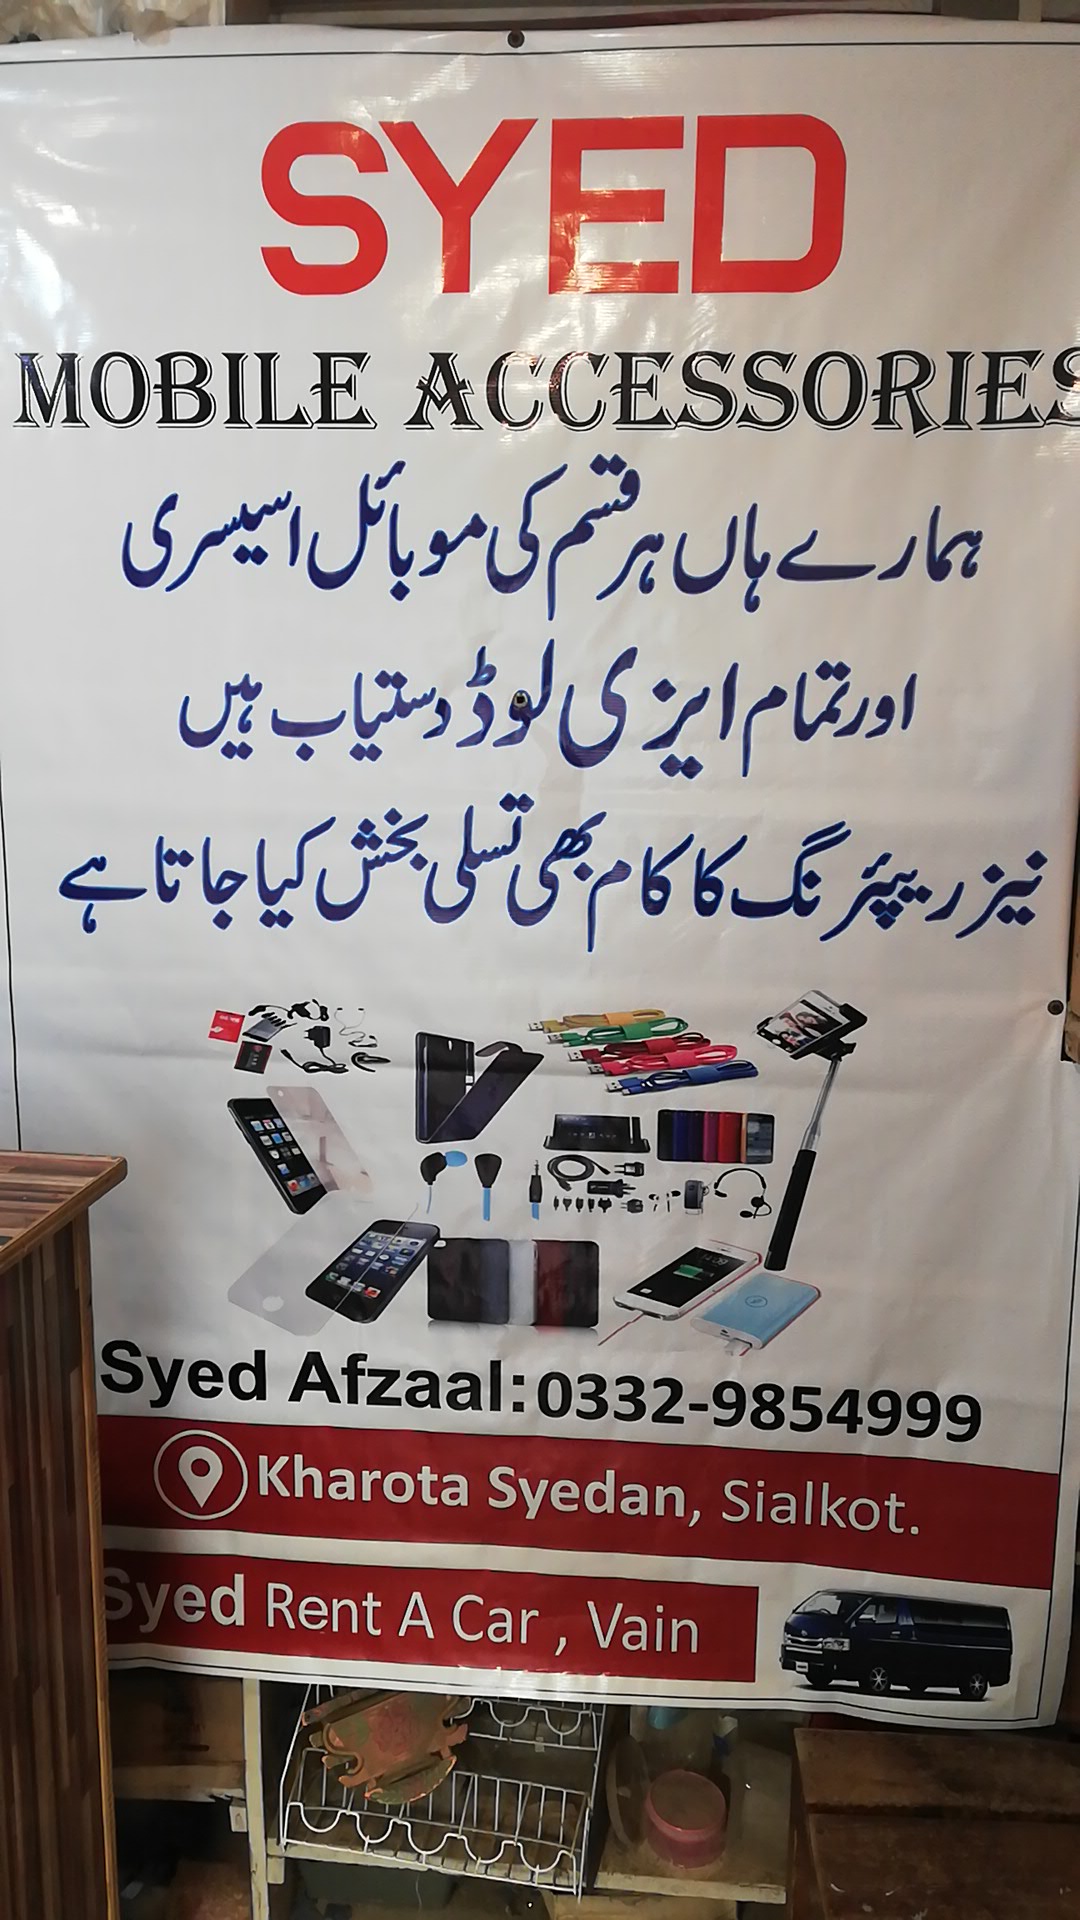 Syed Mobile